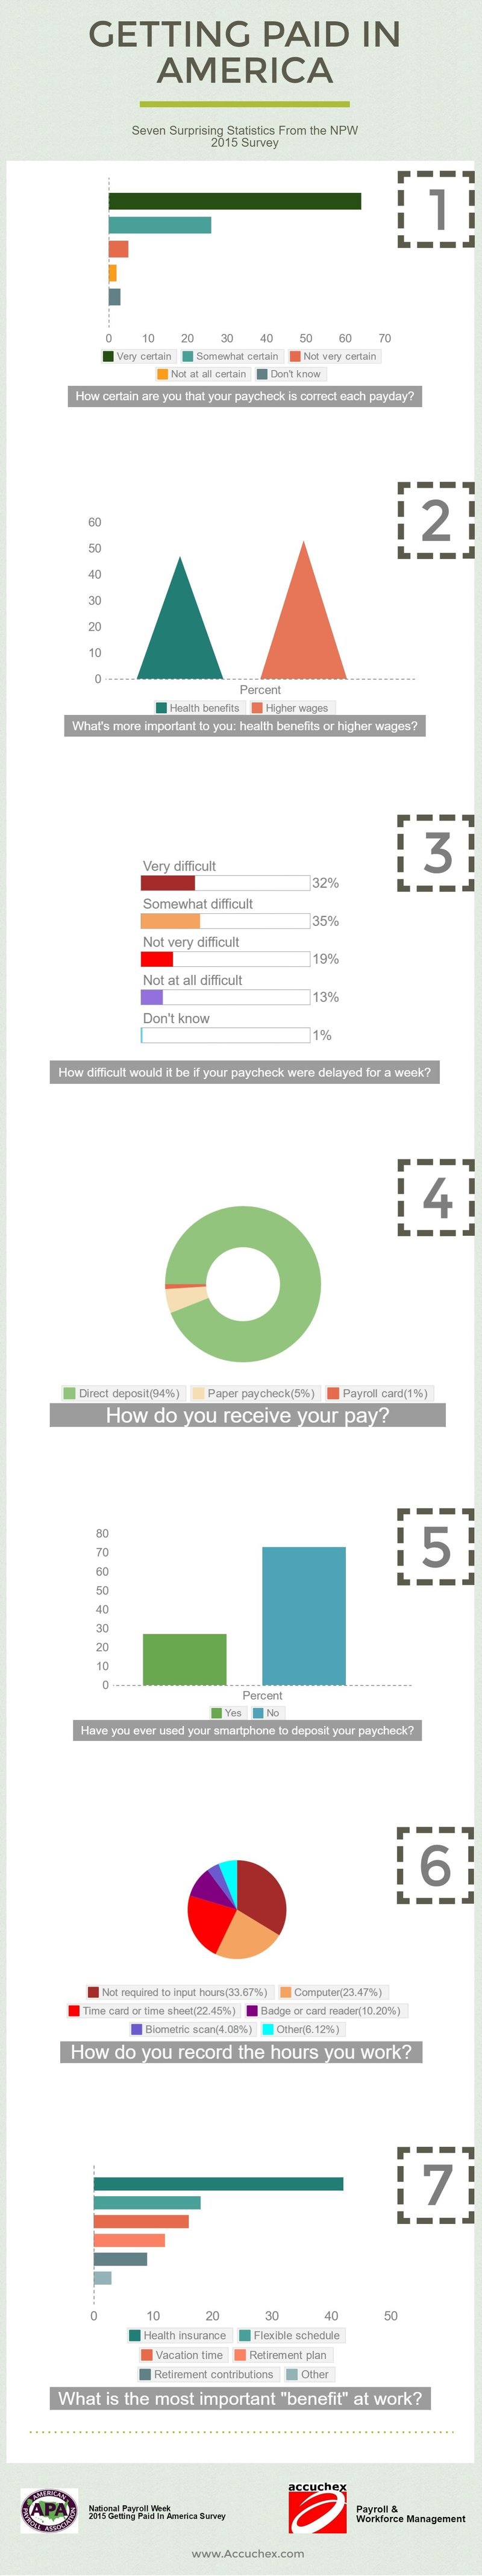 payroll-management-and-employee-expectations-infographic